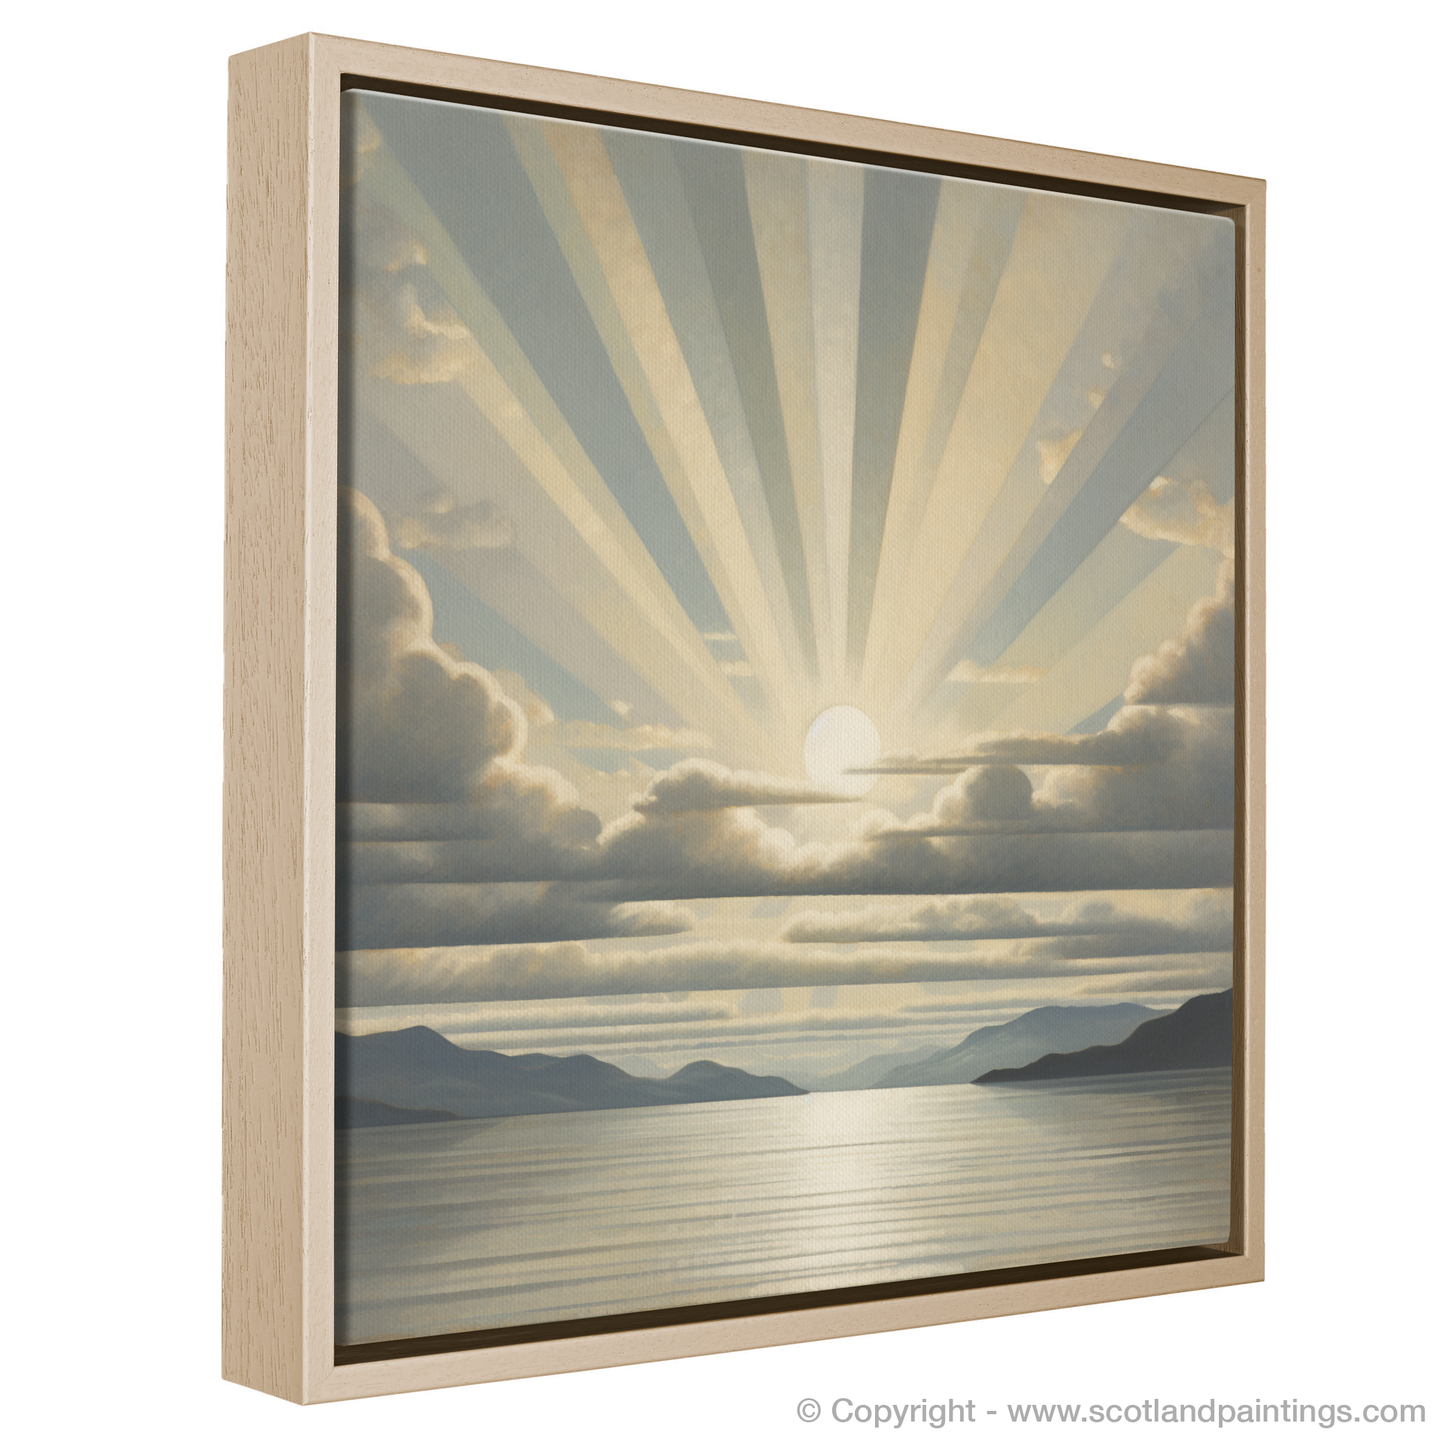 Painting and Art Print of Sun rays through clouds above Loch Lomond entitled "Sunlight Majesty over Loch Lomond".